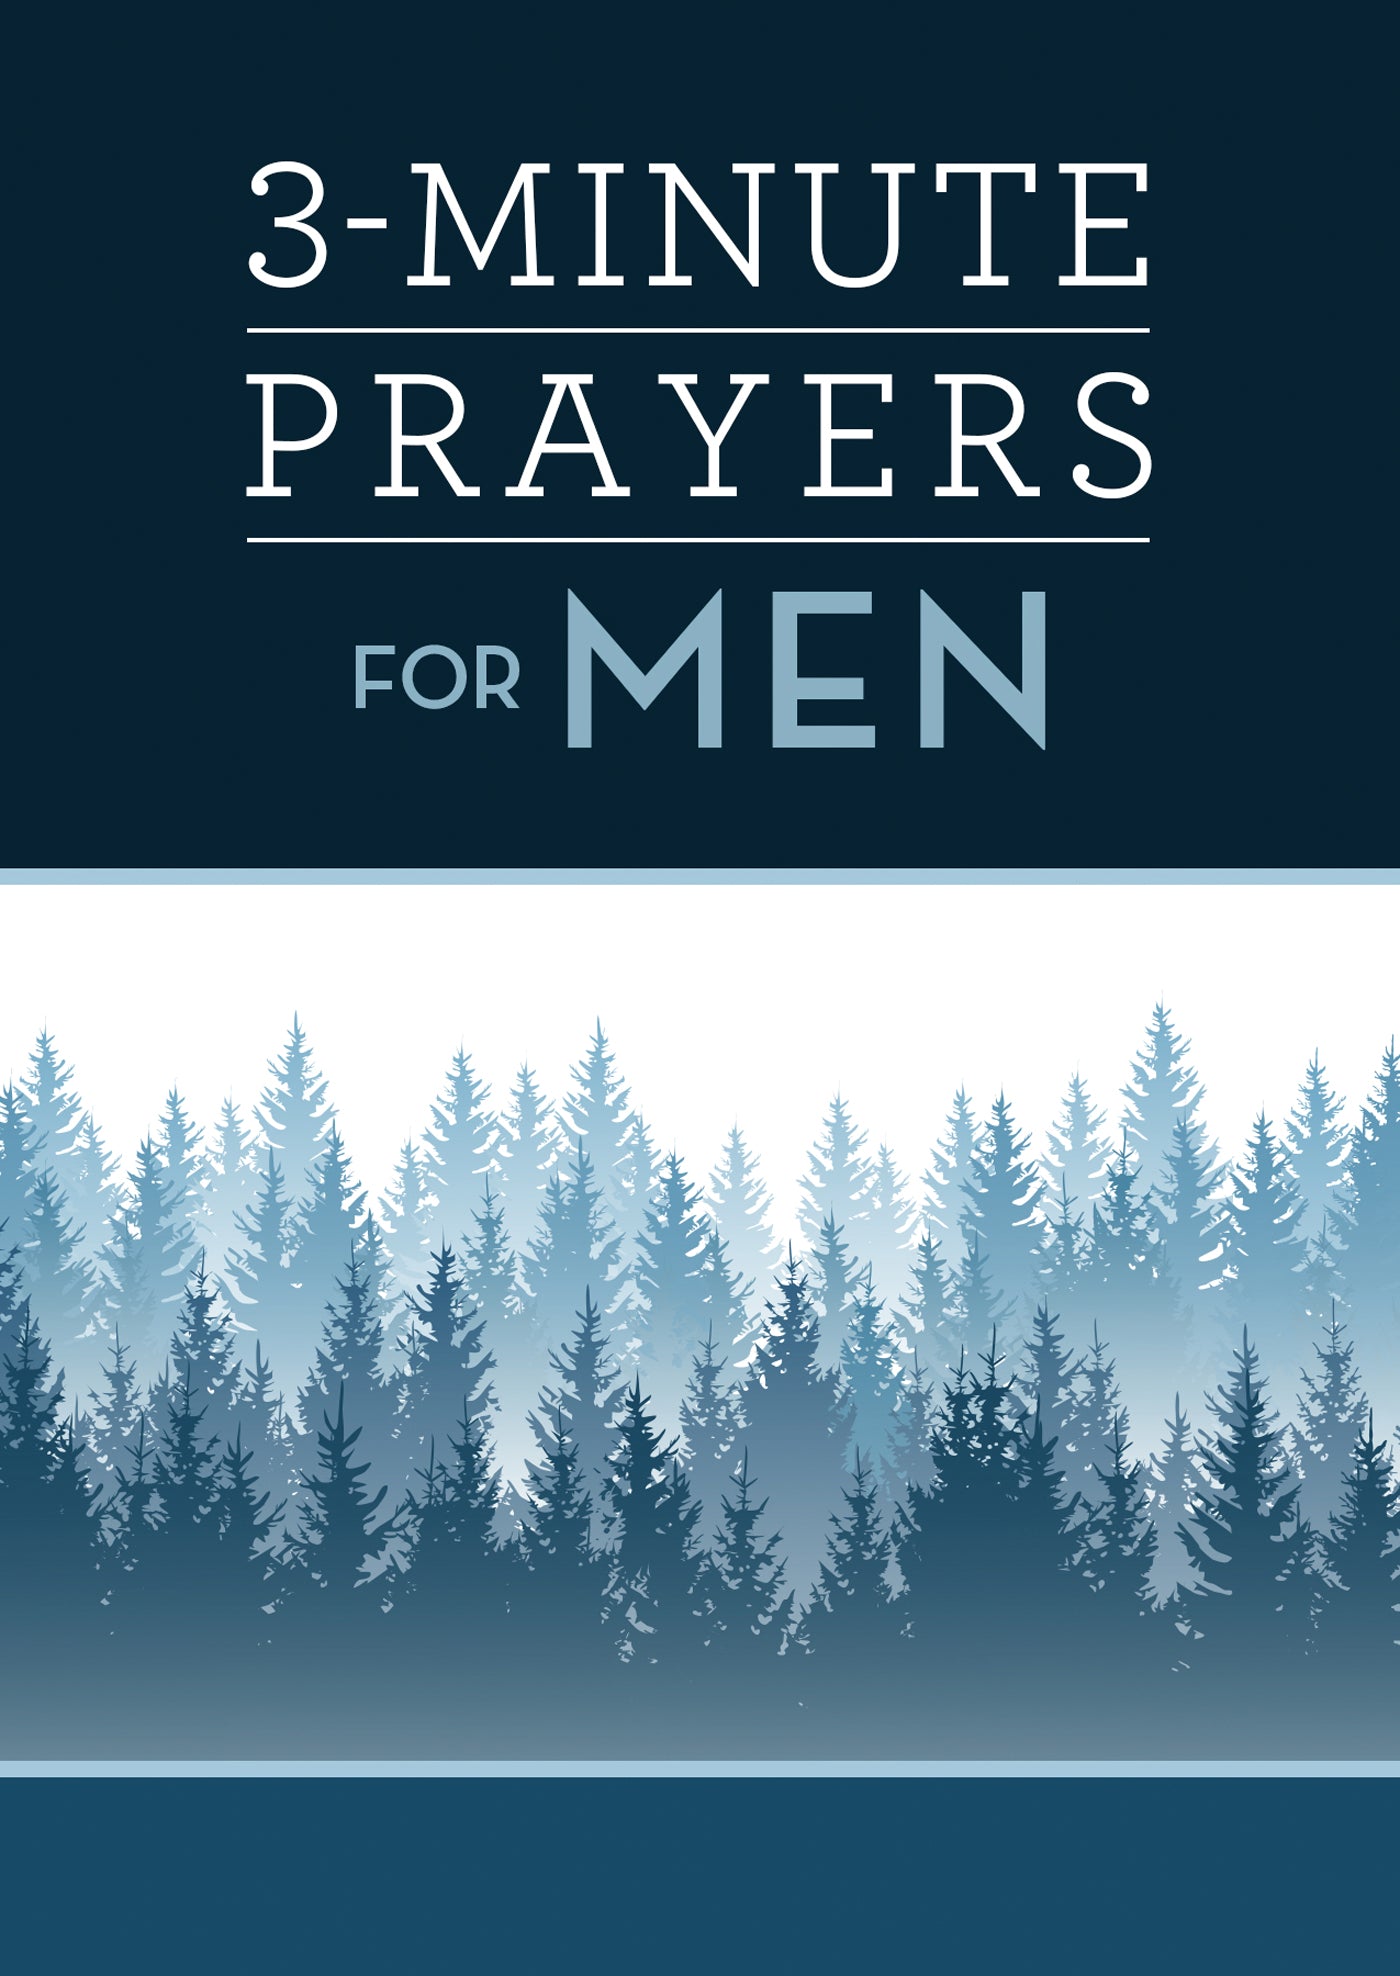 Image of 3 Minute Prayers for Men other